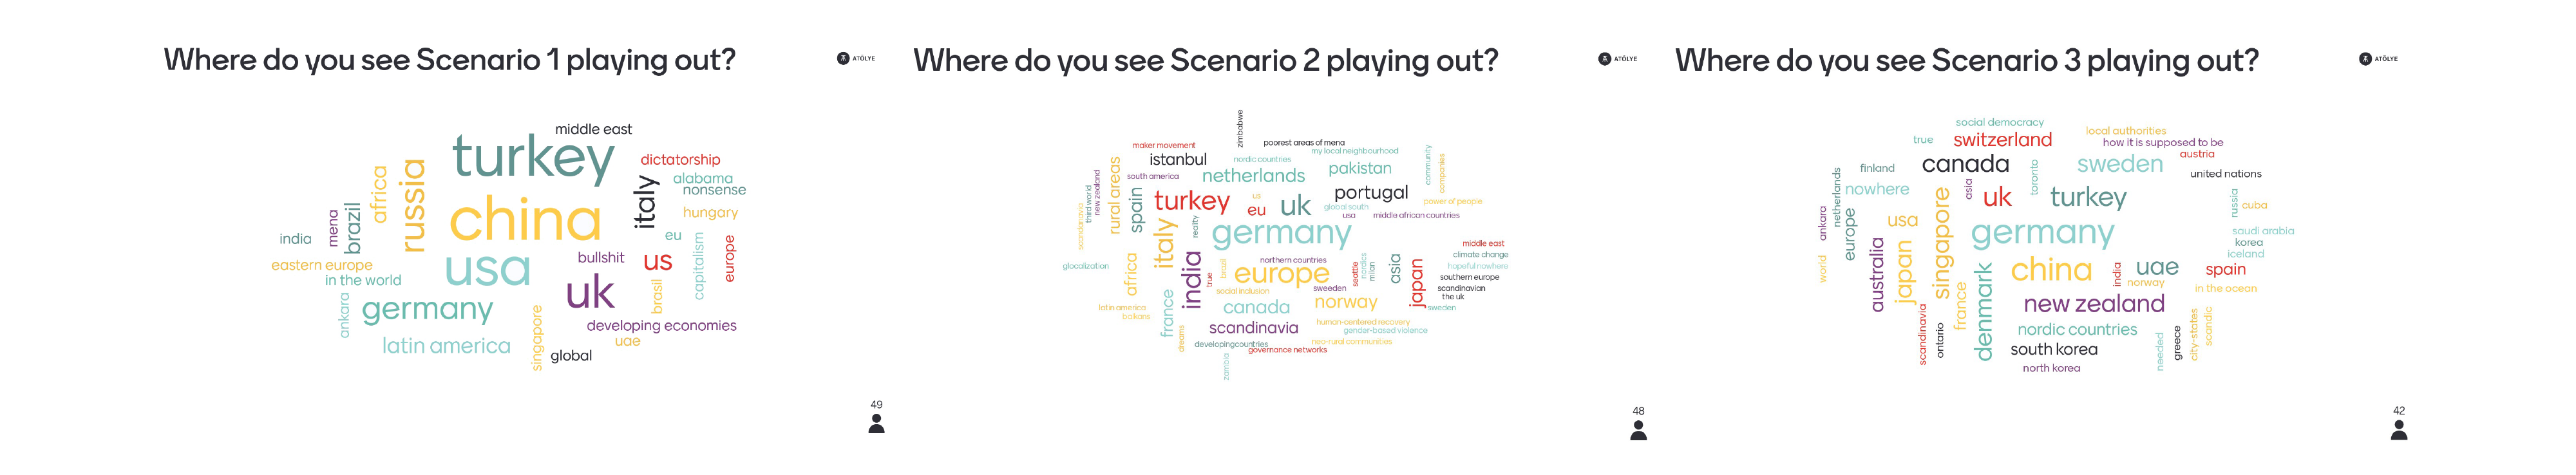 Word clouds formed by the participants' answers